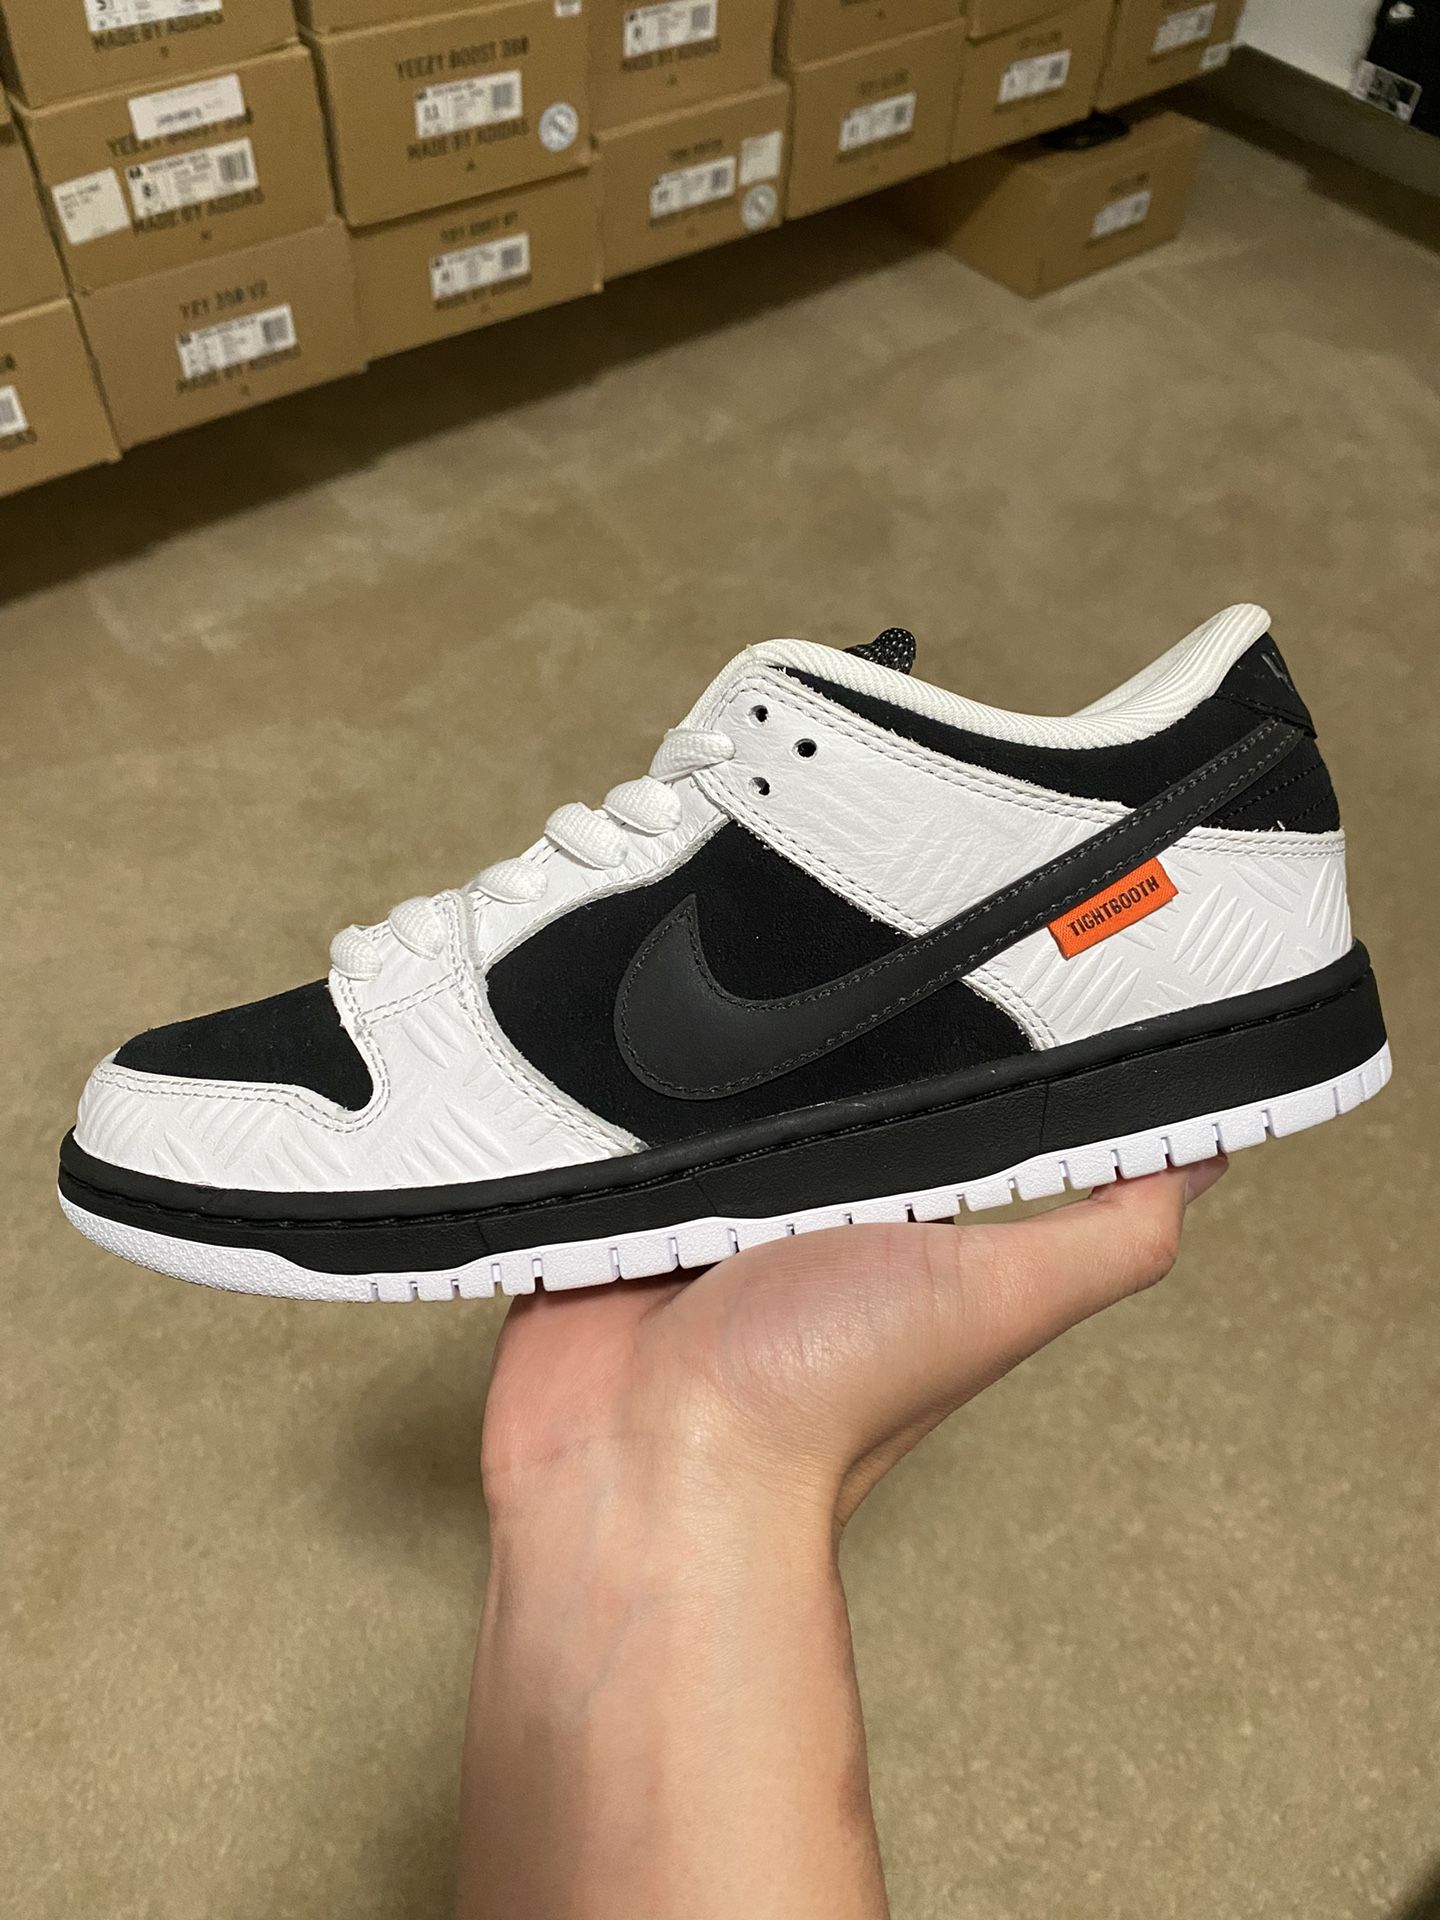 Size 7.5 or 8 - Nike SB Dunk Low x TightBooth White Black